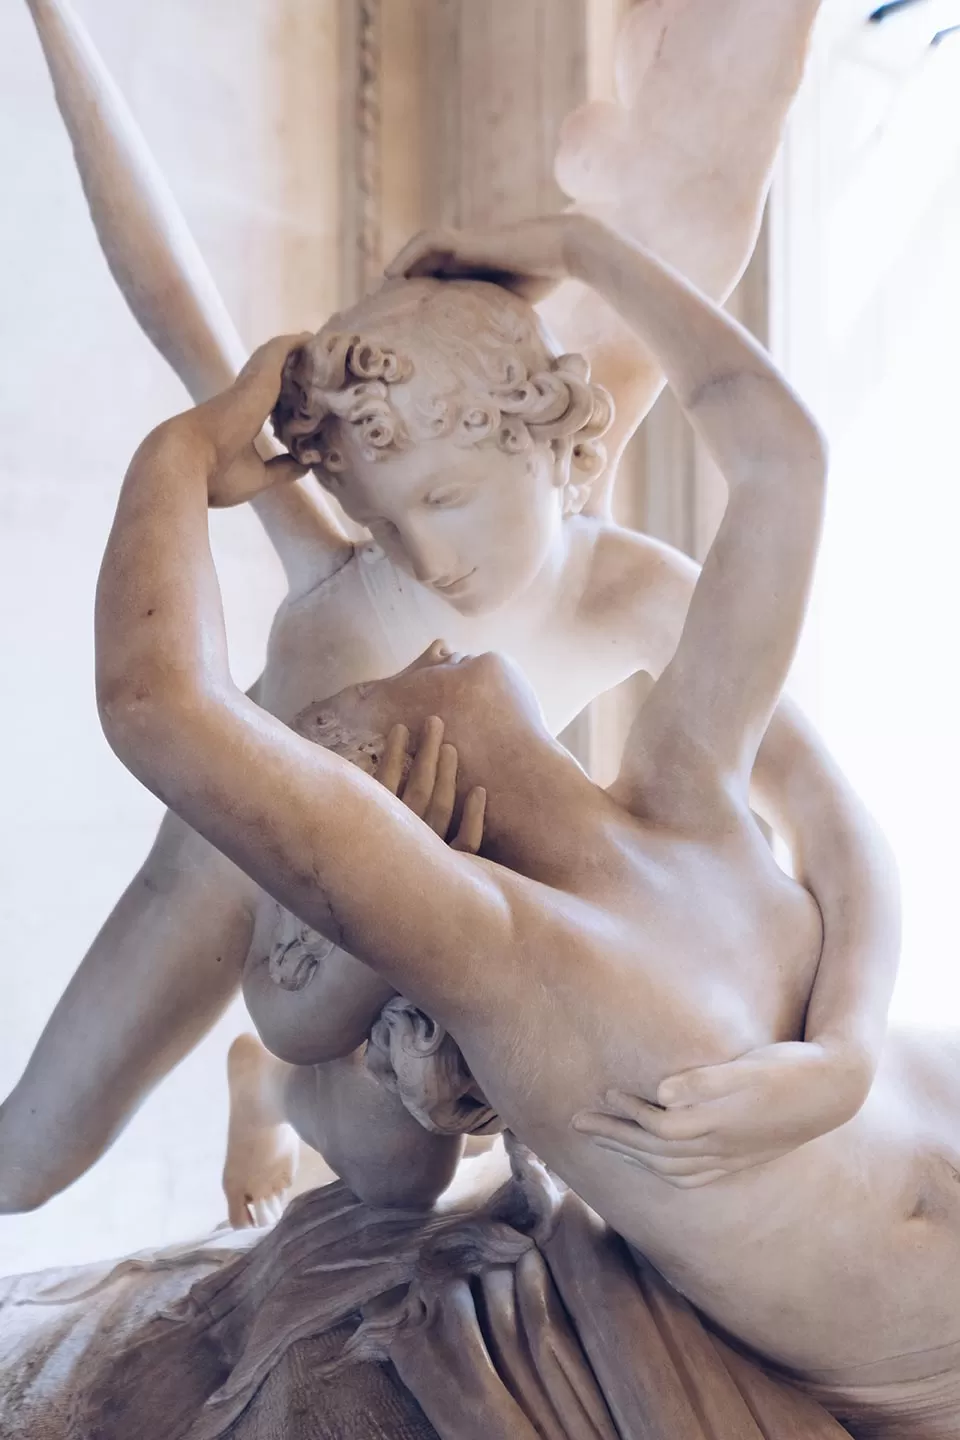 paris itinerary 4 days - what to do in paris in 4 days - amor et psyche statue in the louvre